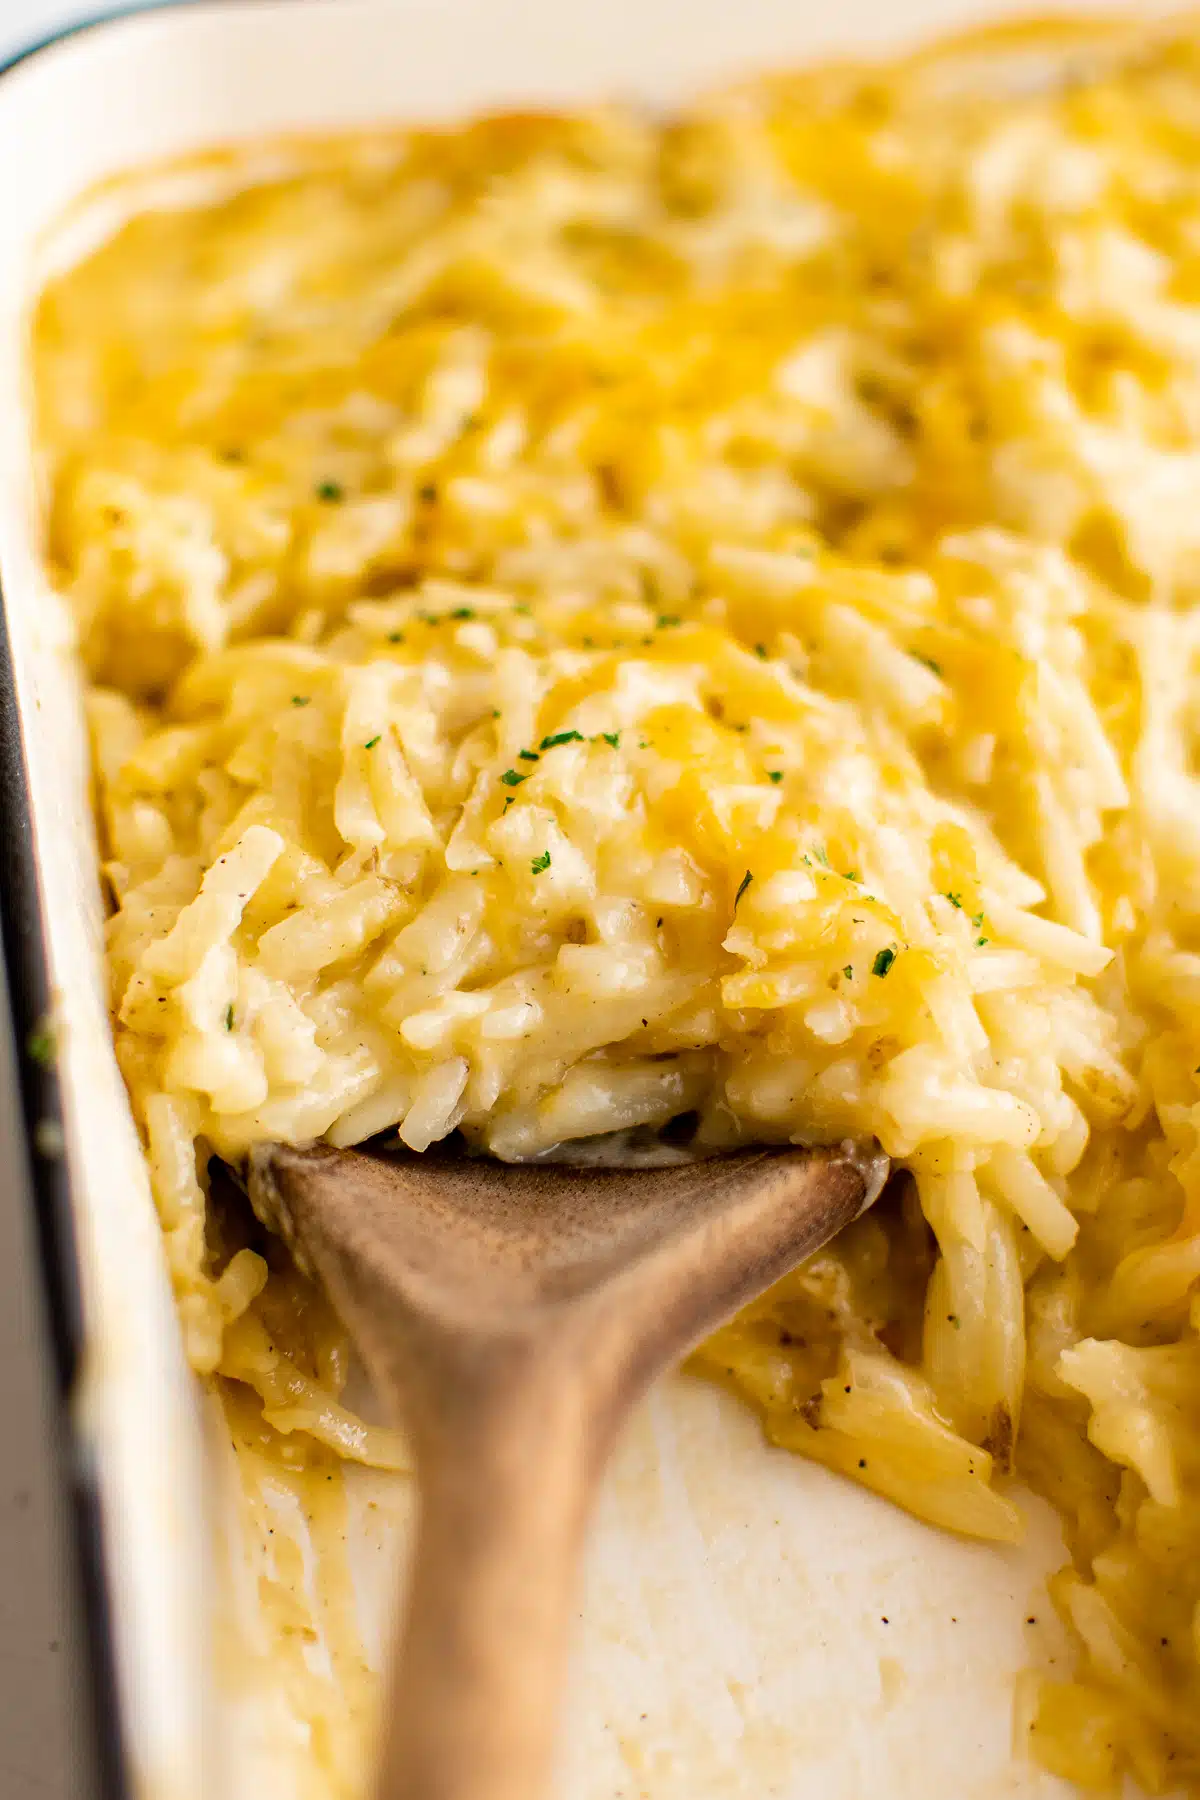 Wooden serving spoon scooping a large serving of cheesy hashbrown casserole from a white baking dish.